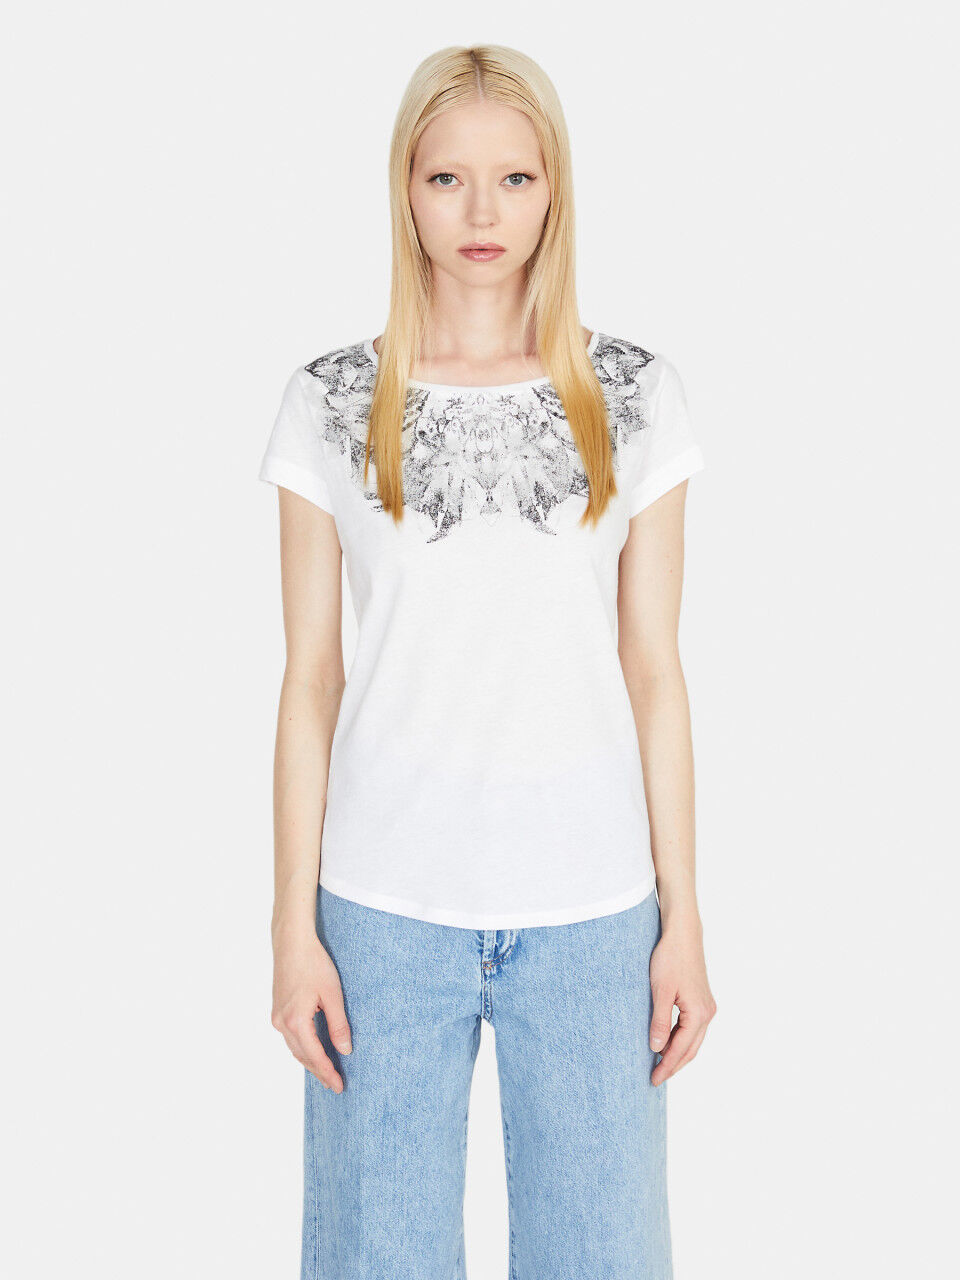 Women's T-shirts and Tops New Arrivals 2023 | Sisley